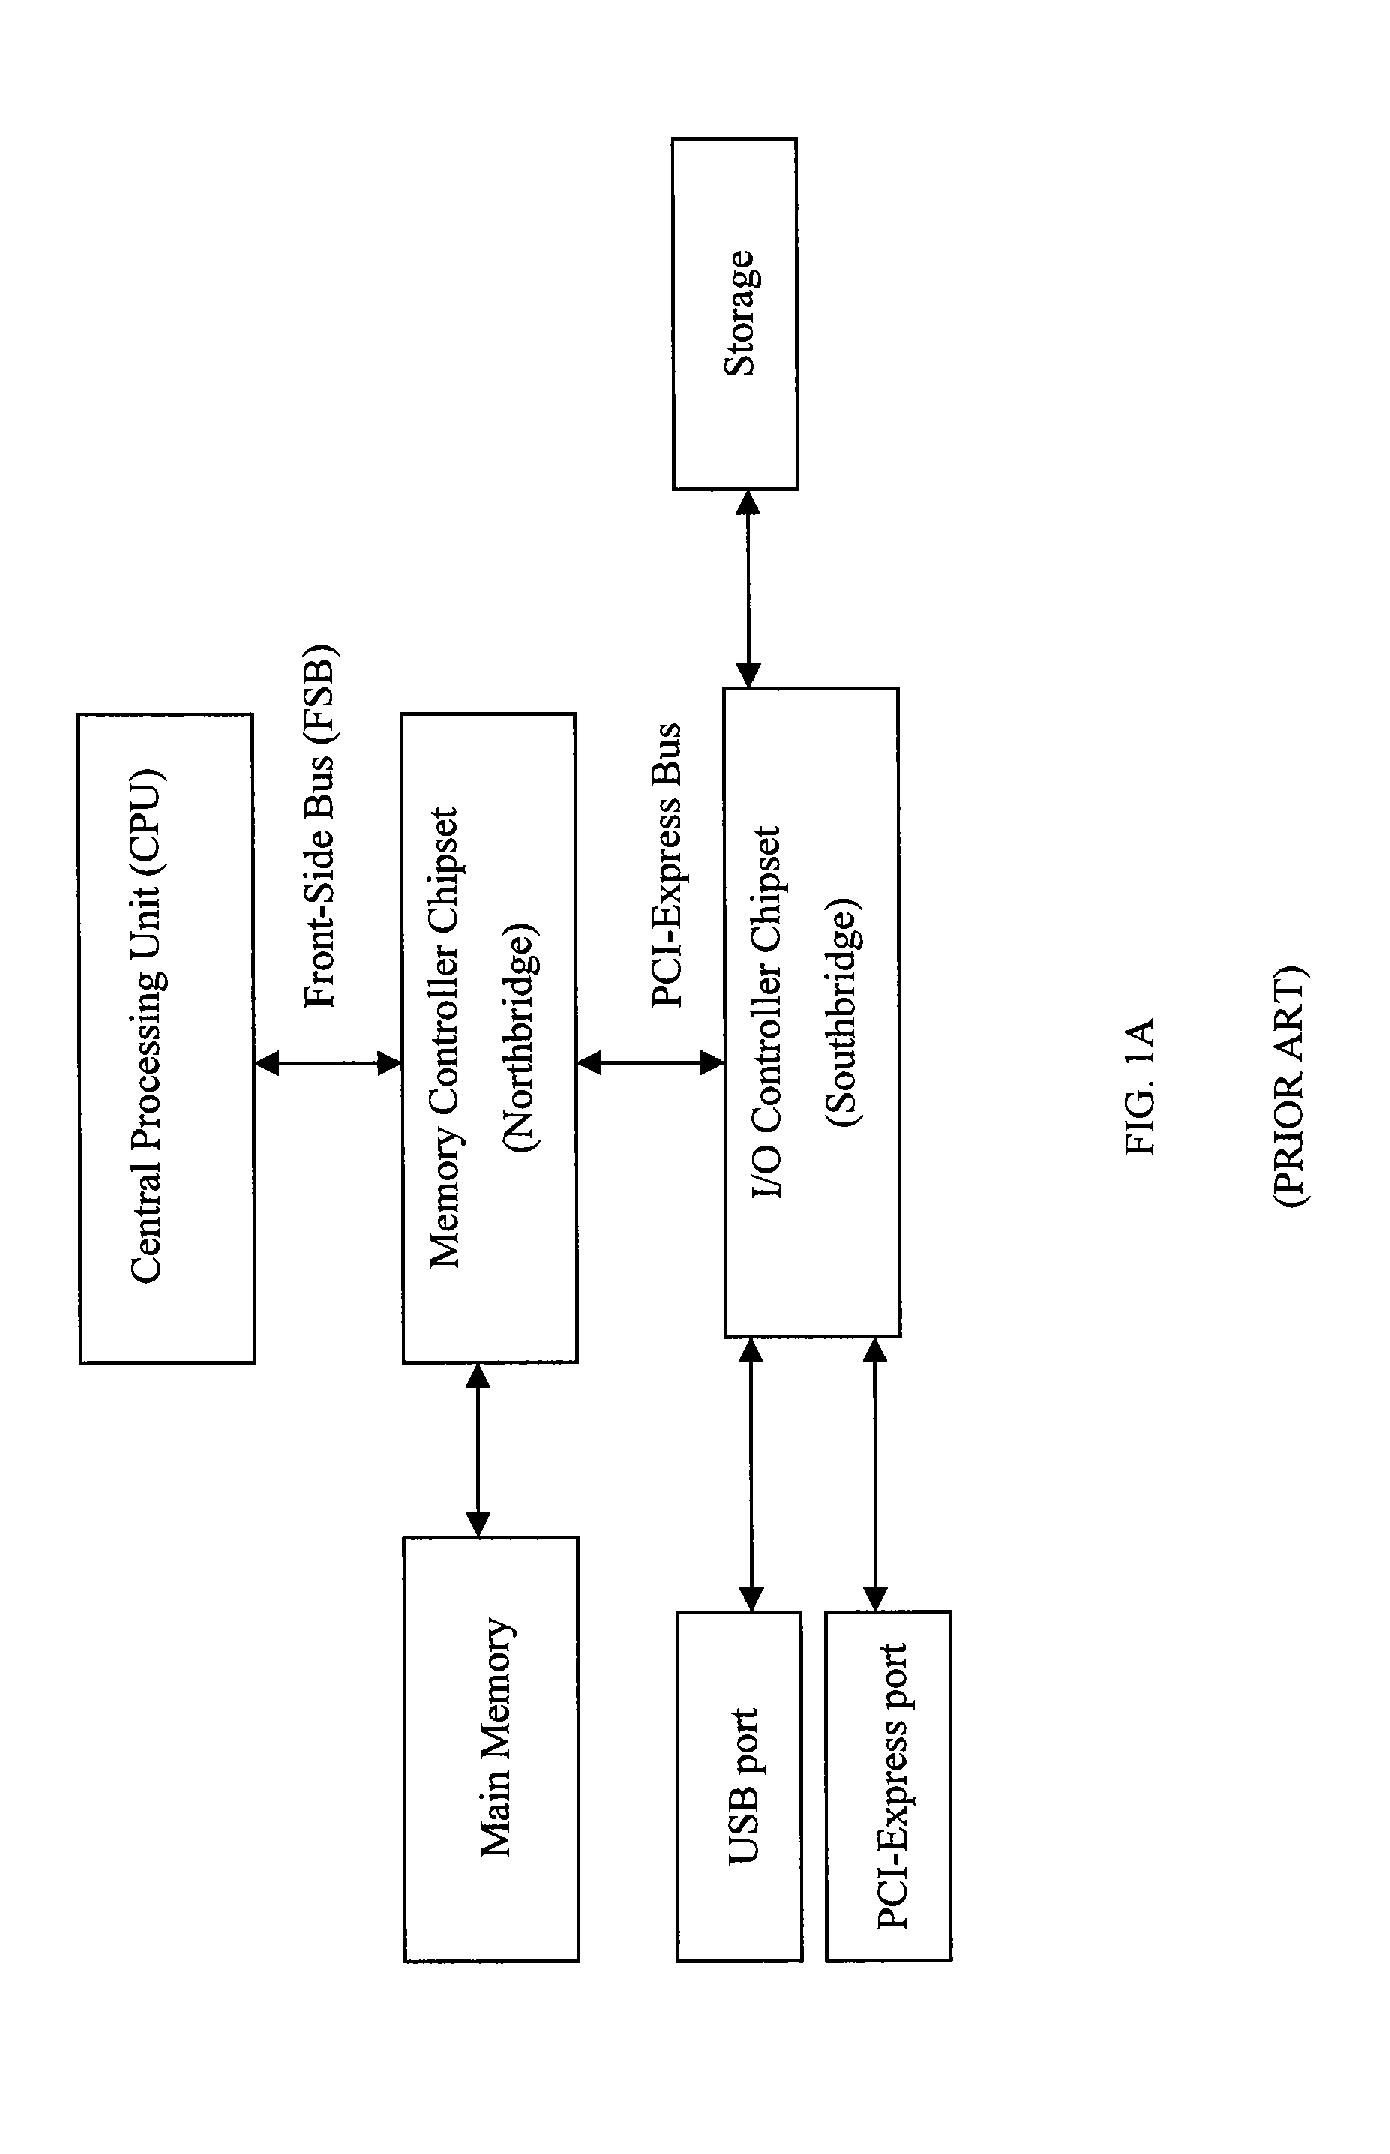 Processor chip arcitecture having integrated high-speed packet switched serial interface